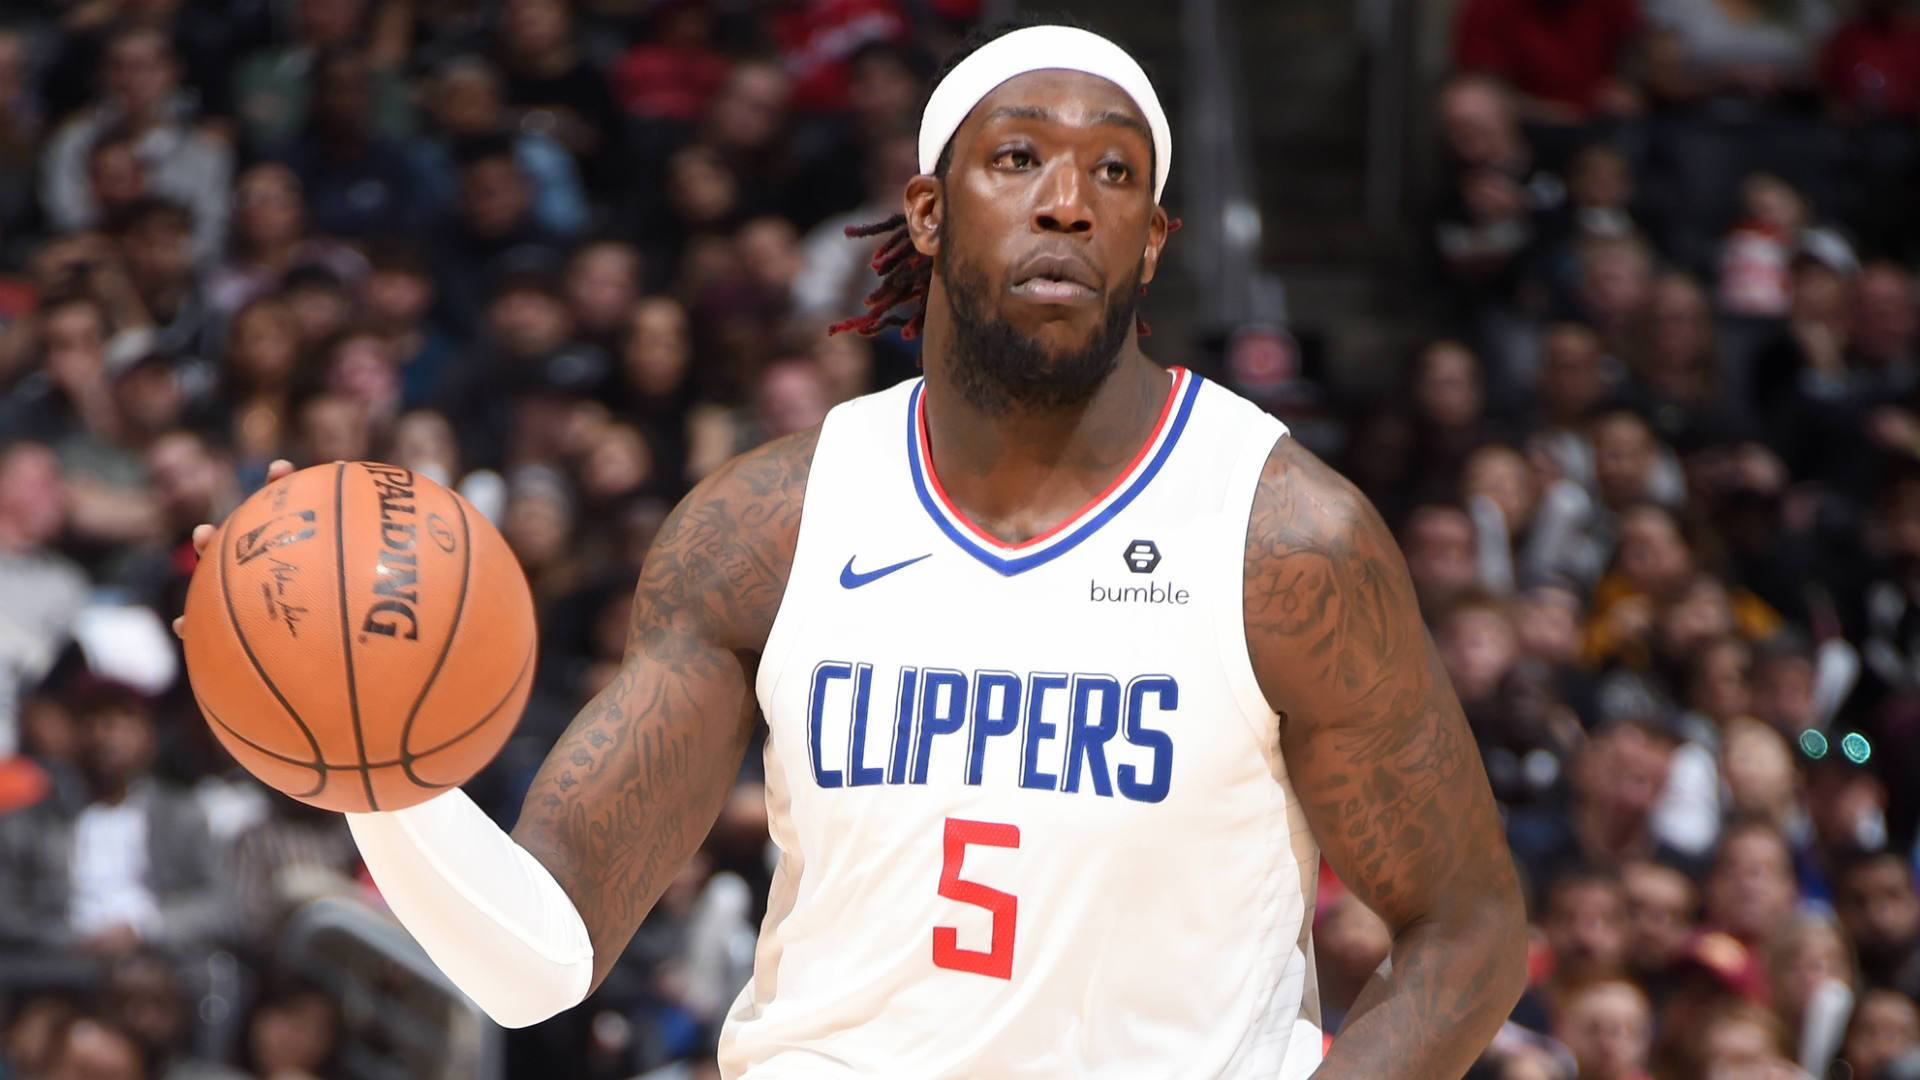 Report: Montrezl Harrell returns to Clippers on two-year deal | NBA | Sporting News1920 x 1080